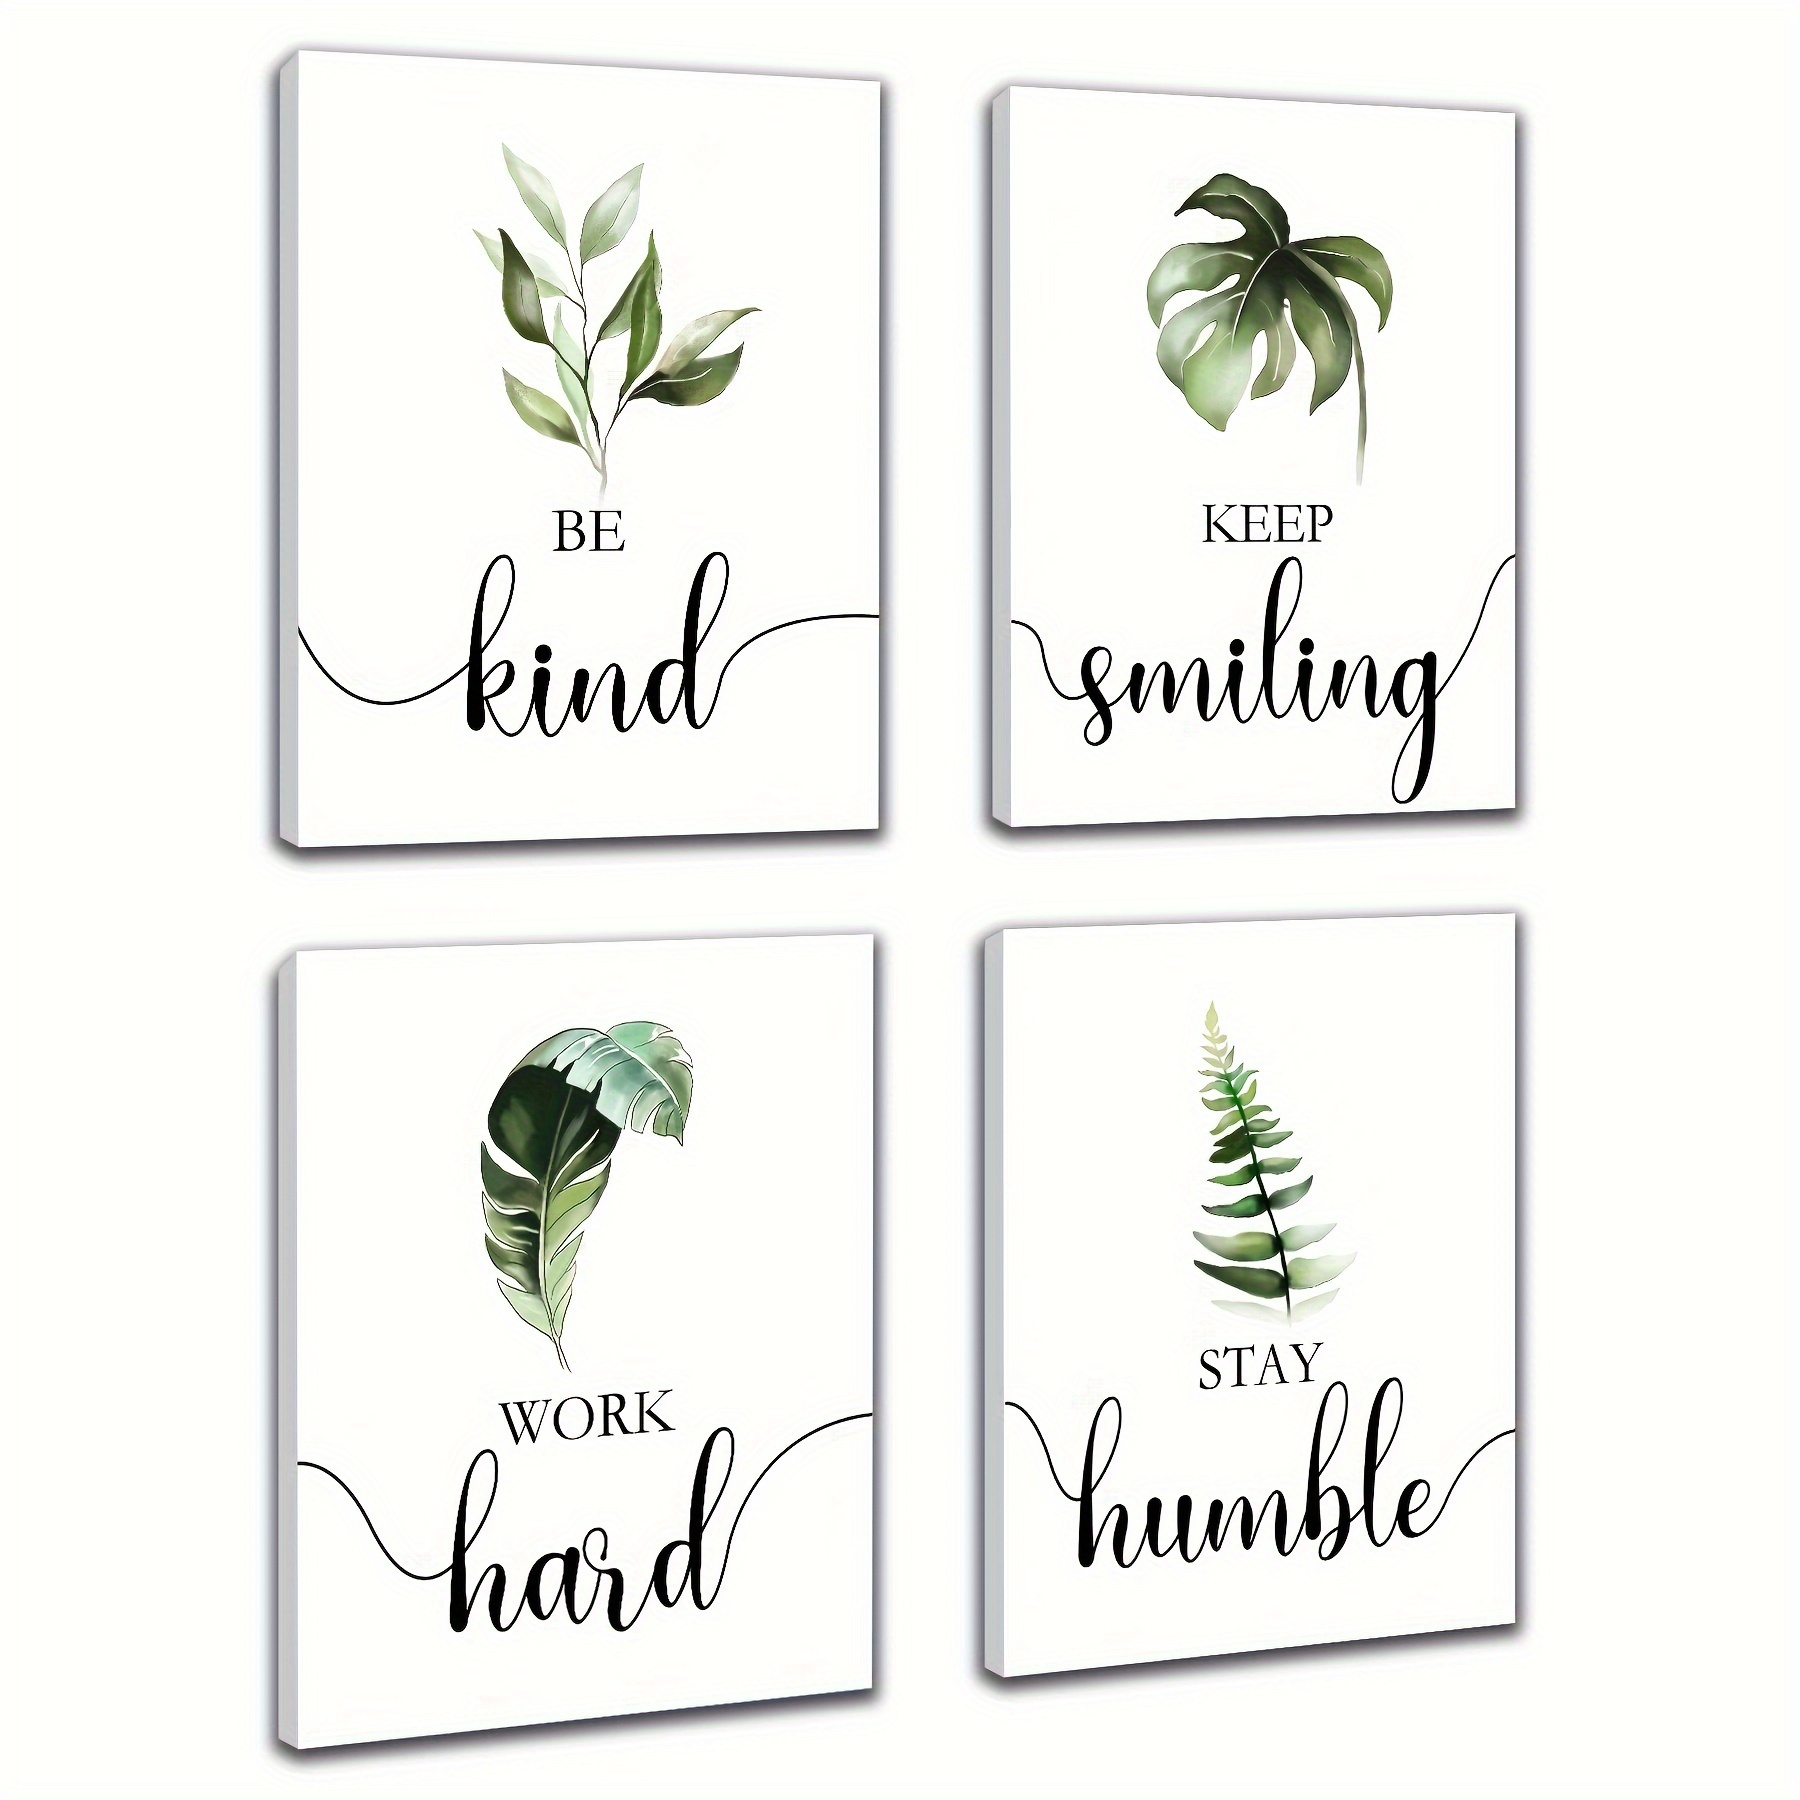 

Boho Botanical Plant Inspirational Wall Decor, Motivational Wall Art, Office & Bedroom Wall Decor, Positive Quotes & Sayings, Daily Affirmations For Men, 8x10 Inch (20x25 Cm, Wooden Frames)